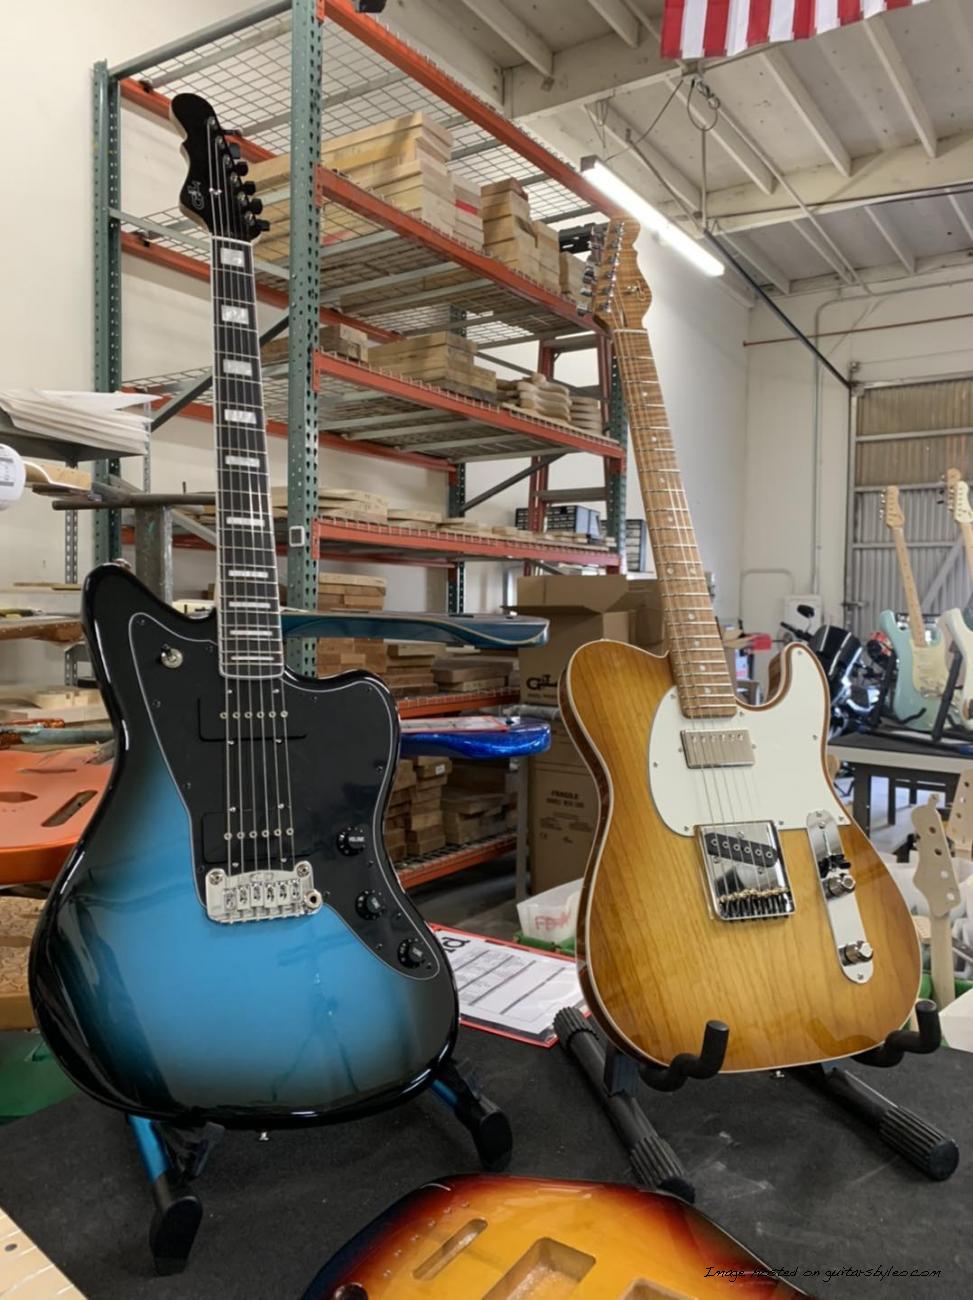 Instruments on display in the build room-1